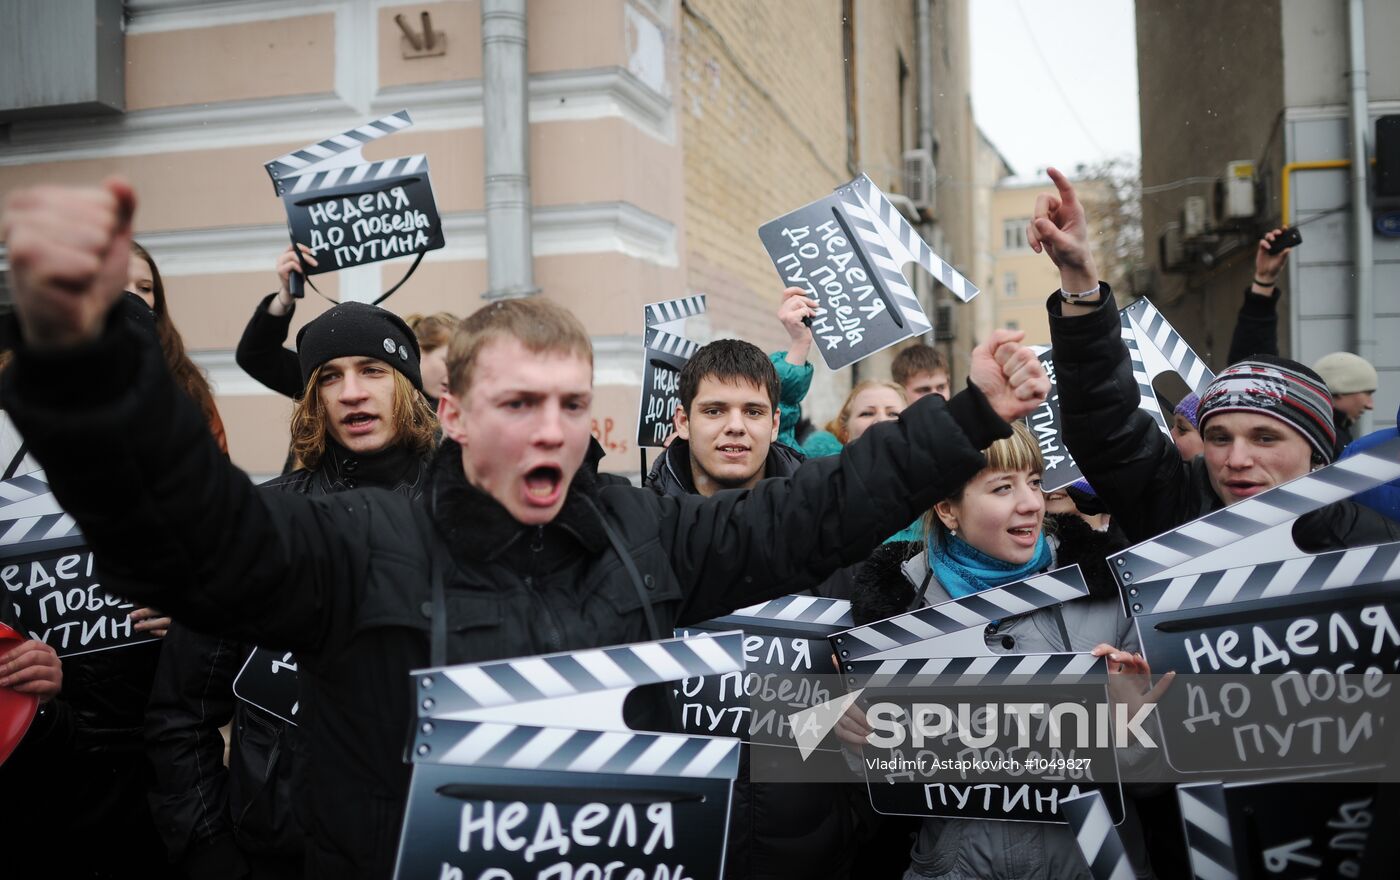 Supporters of Vladimir Putin stage rally in Moscow